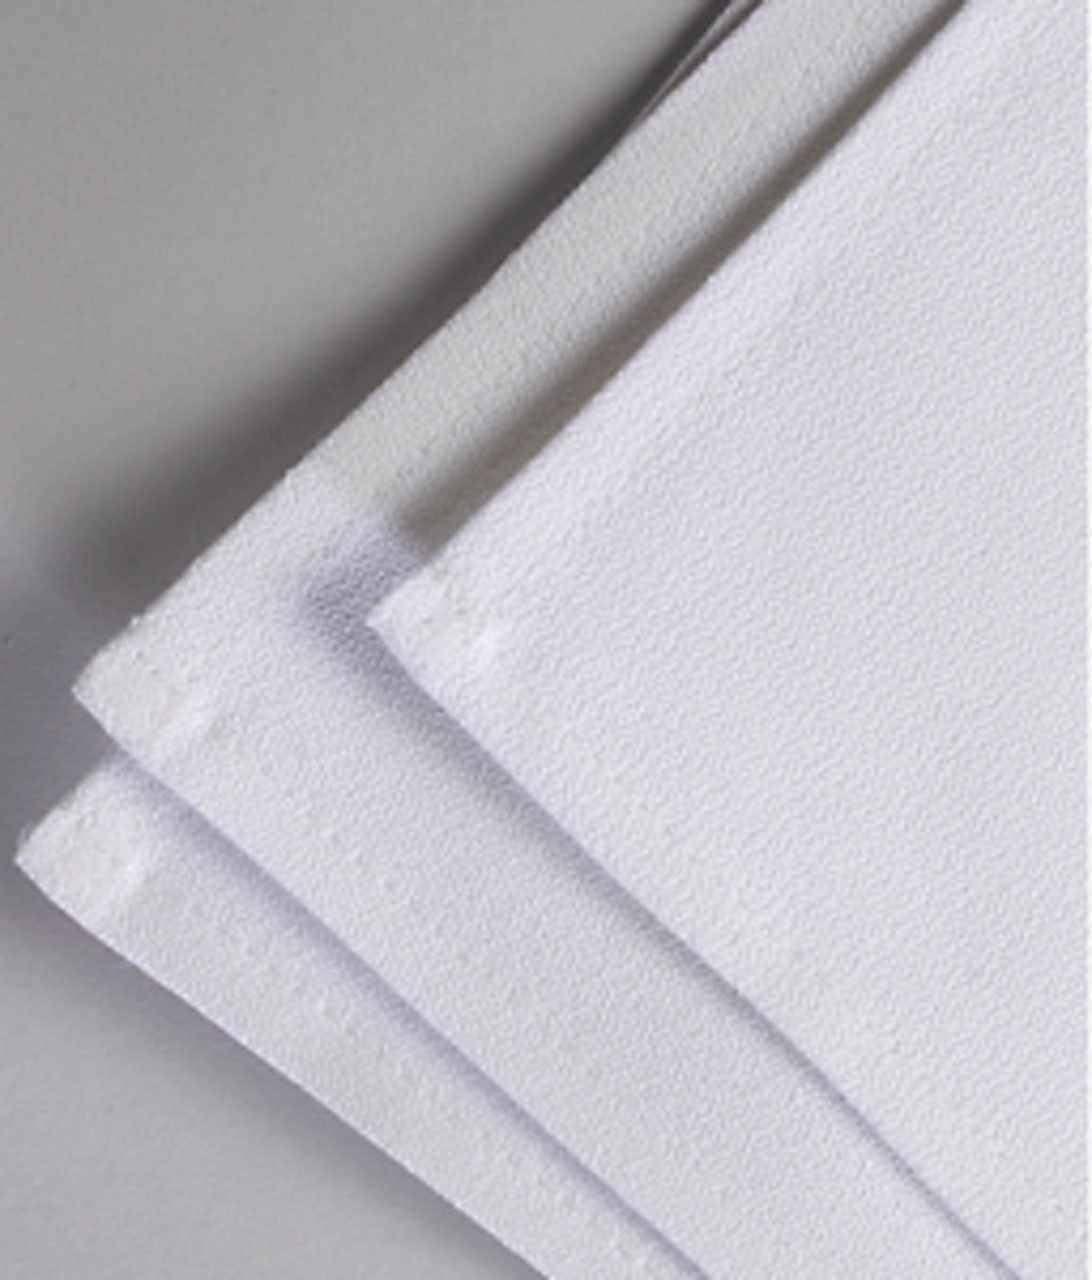 What are the specifications of these Cotton Momie Linen Napkins?